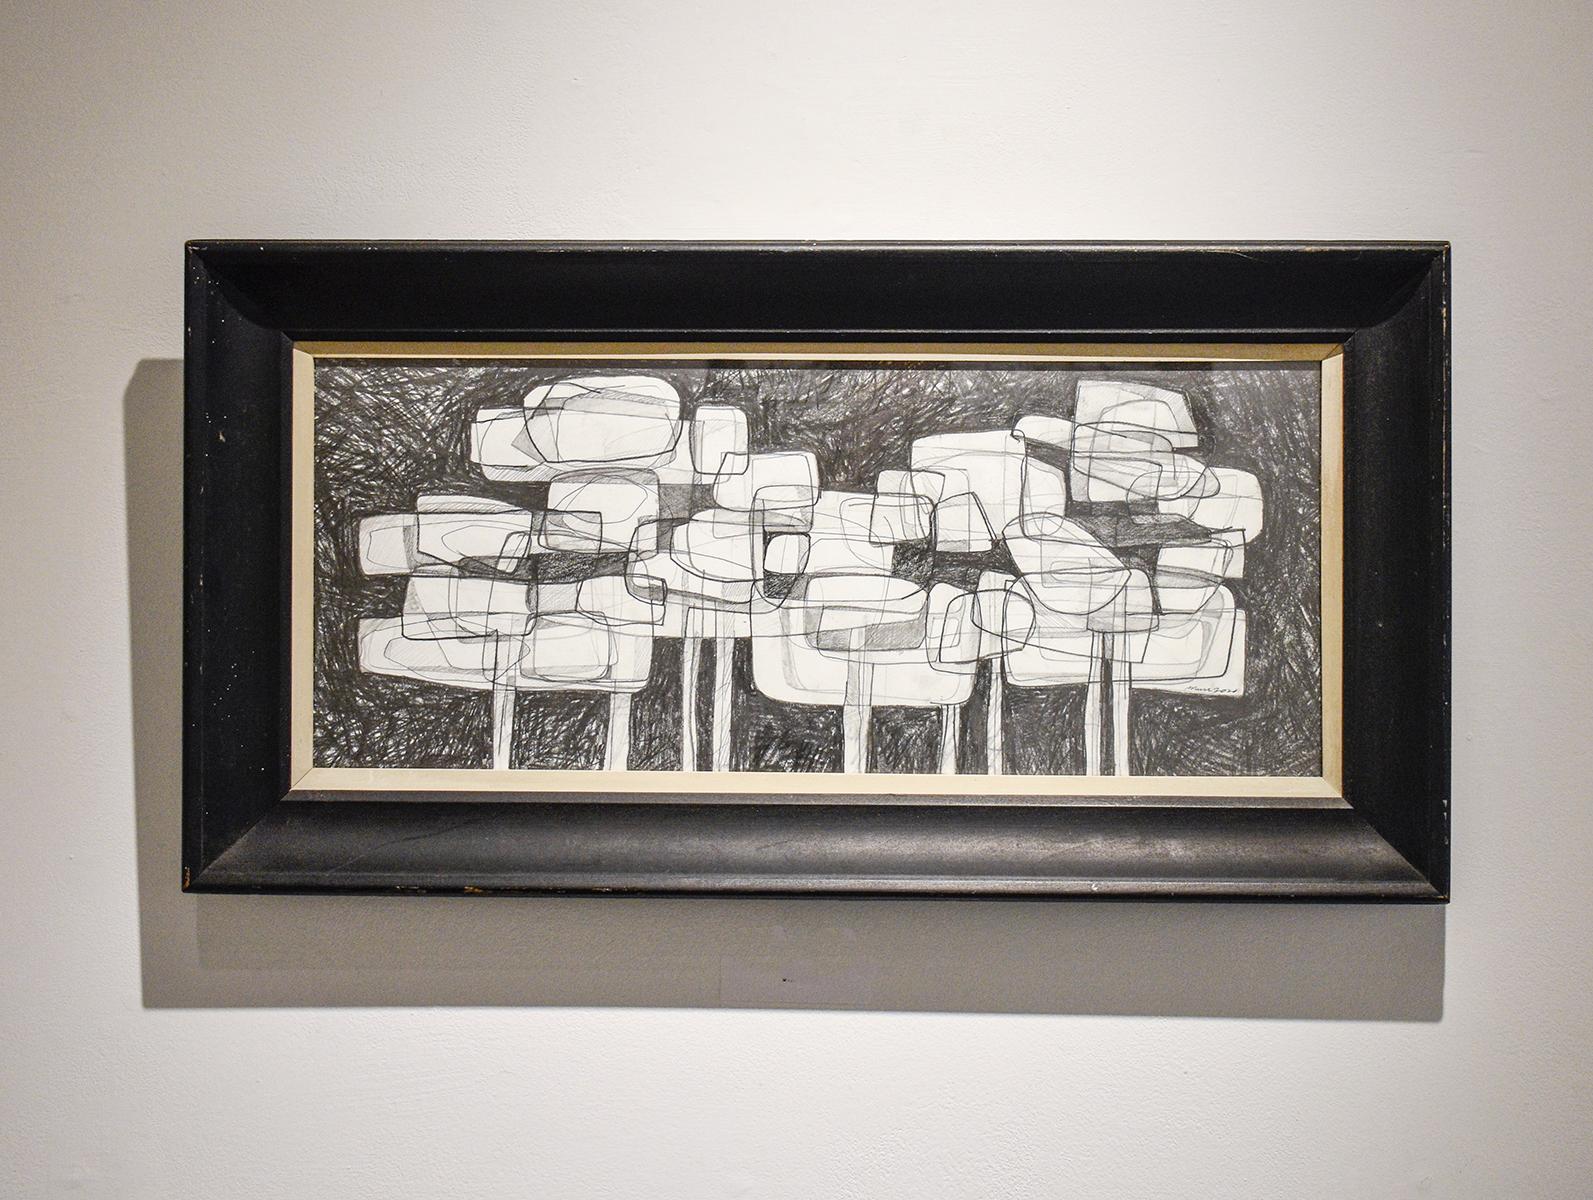 Waterlilies 22 (Abstract Figurative Graphite Drawing in Antique Black Frame) - Art by David Dew Bruner